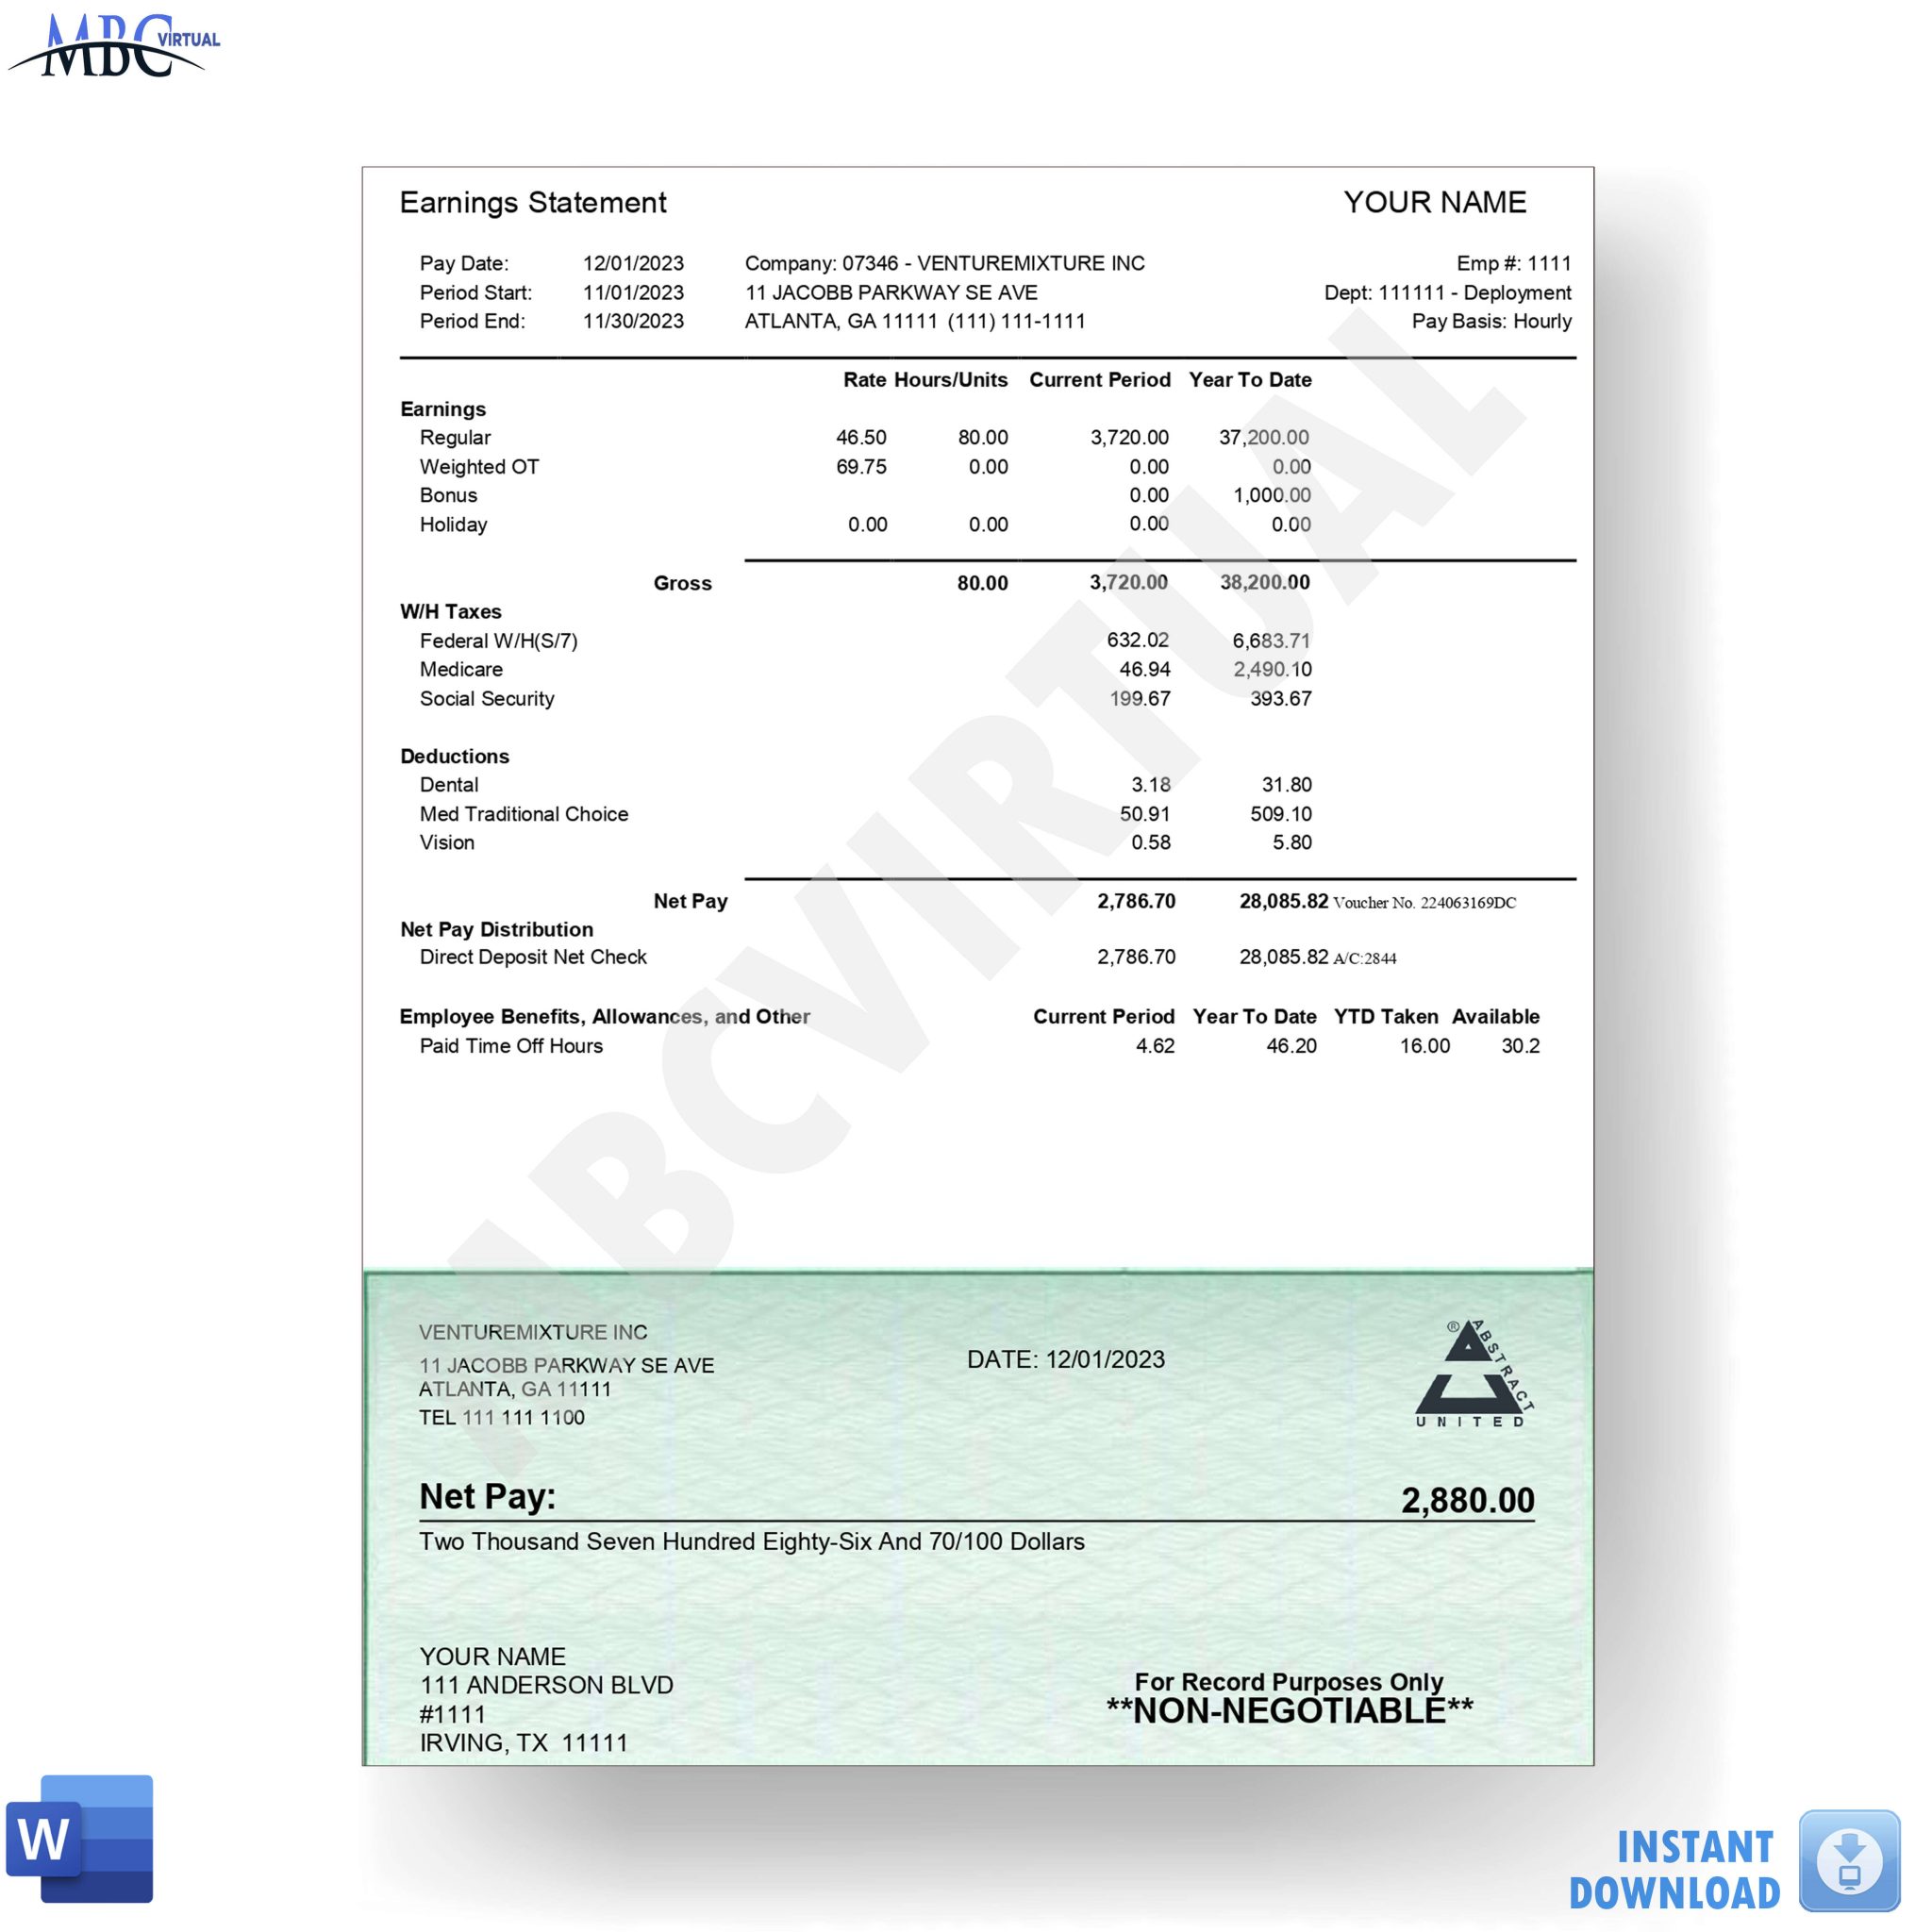 Paystub Earning Statement Template - MbcVirtual